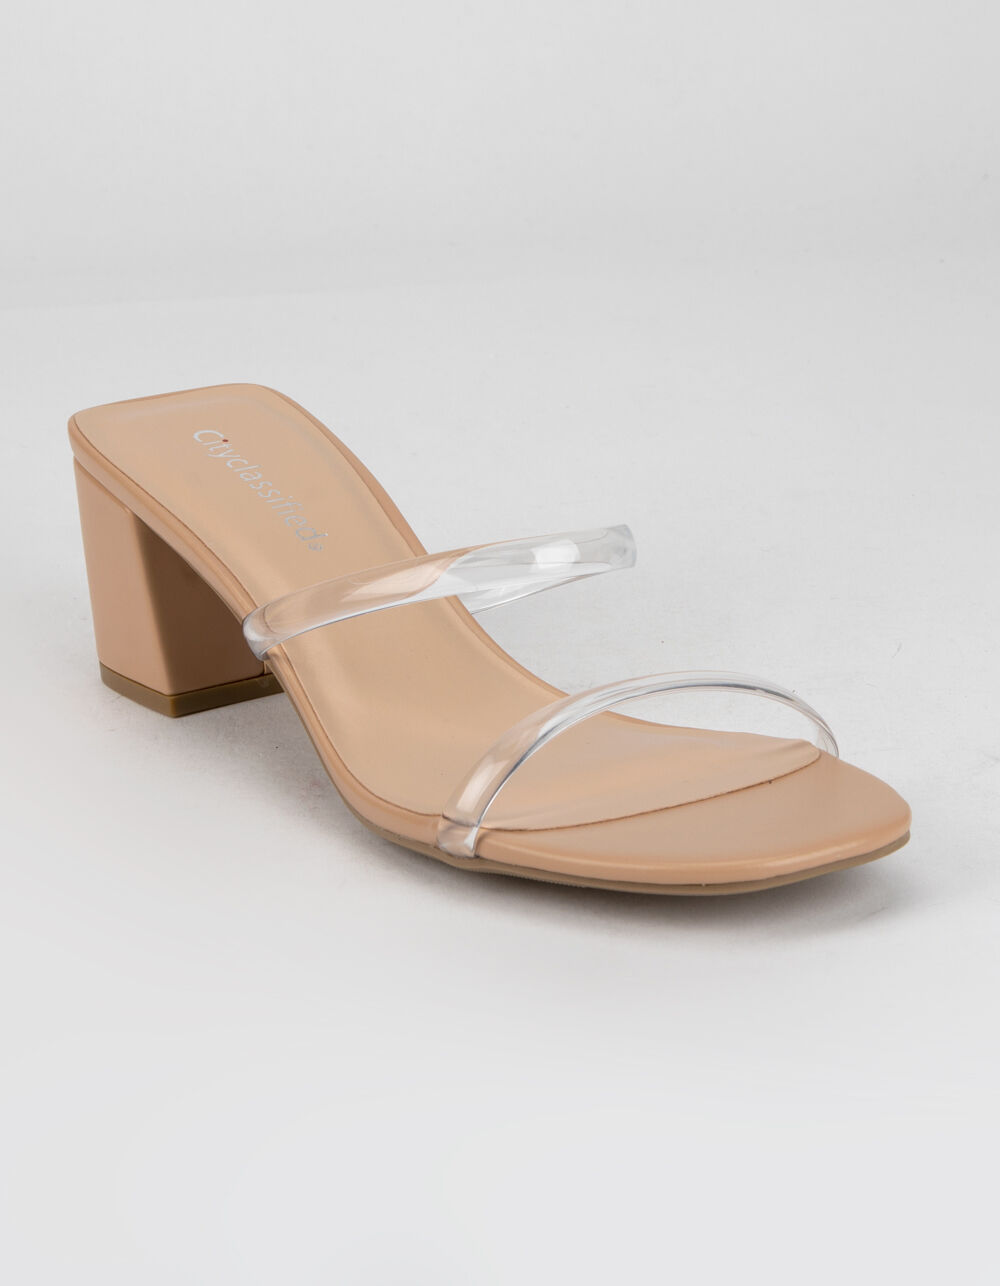 CITY CLASSIFIED Clear Two Strap Womens Nude Heels - NUDE | Tillys